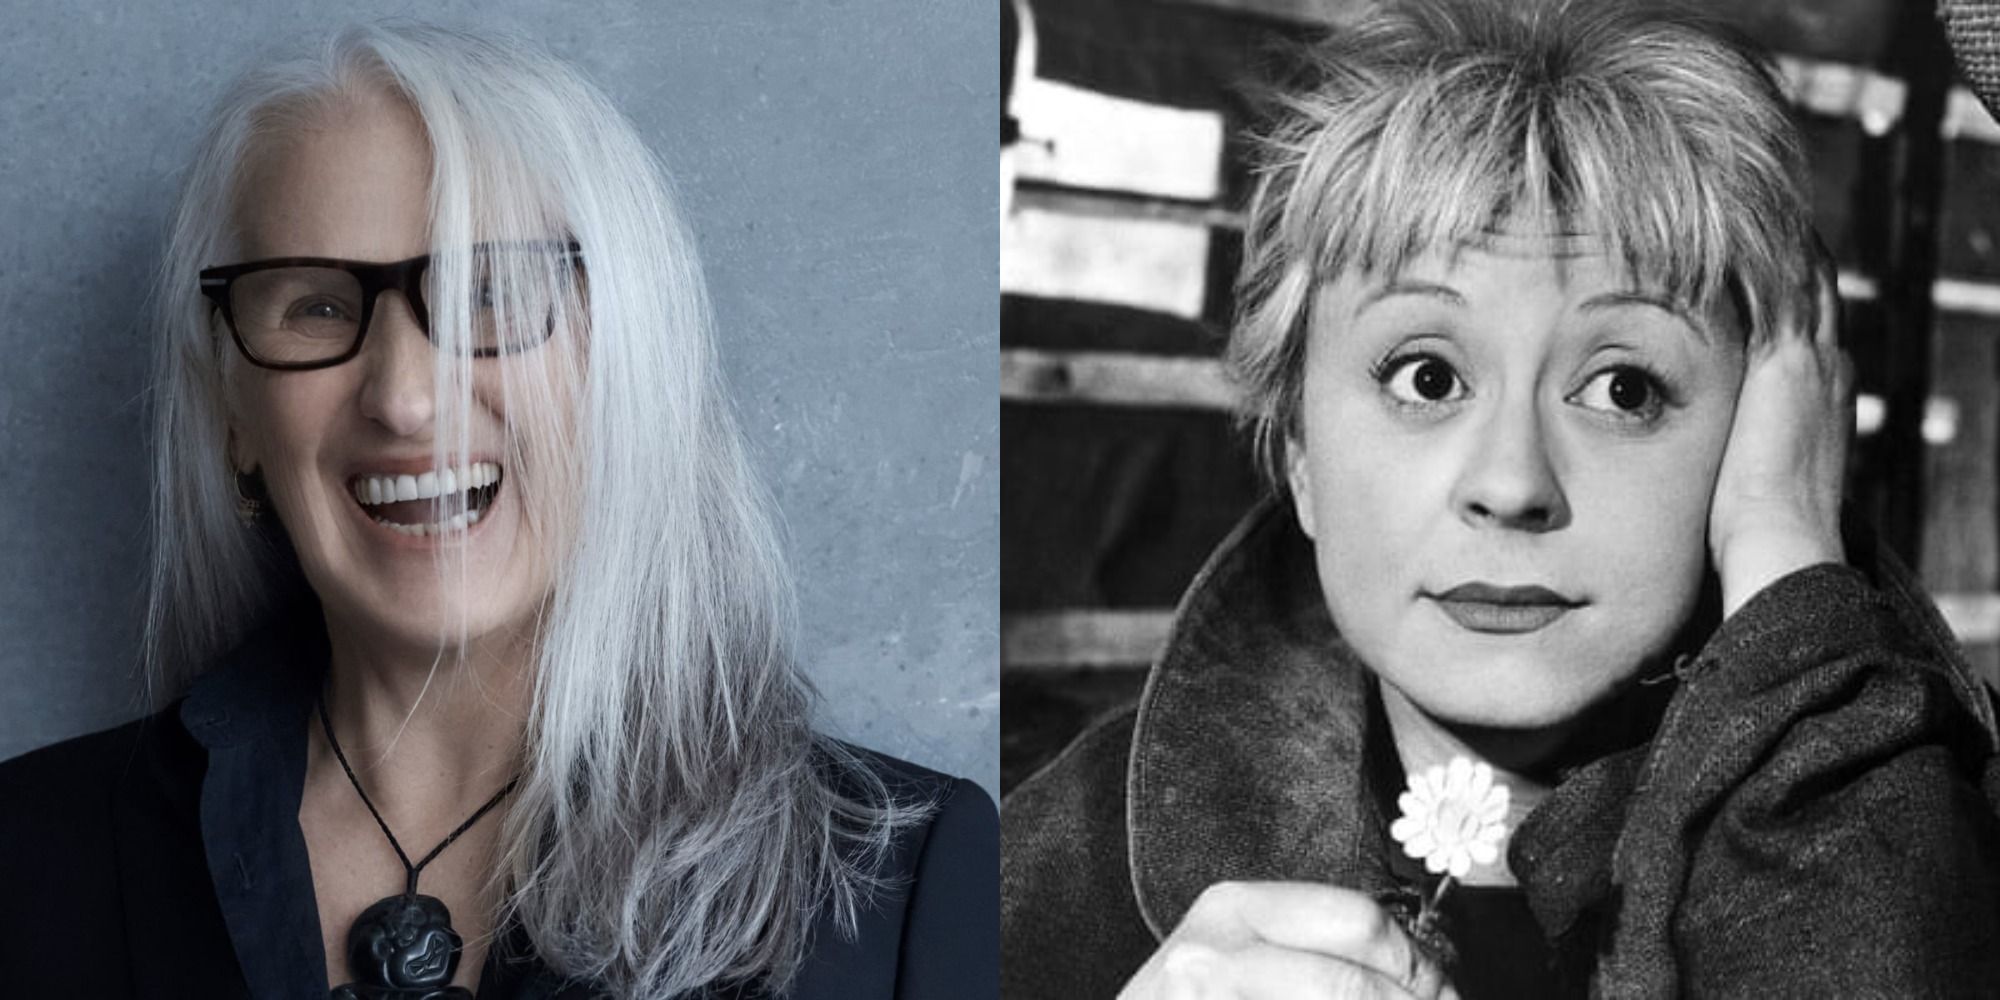 Split image showing Jane Campion and a character from La Strada